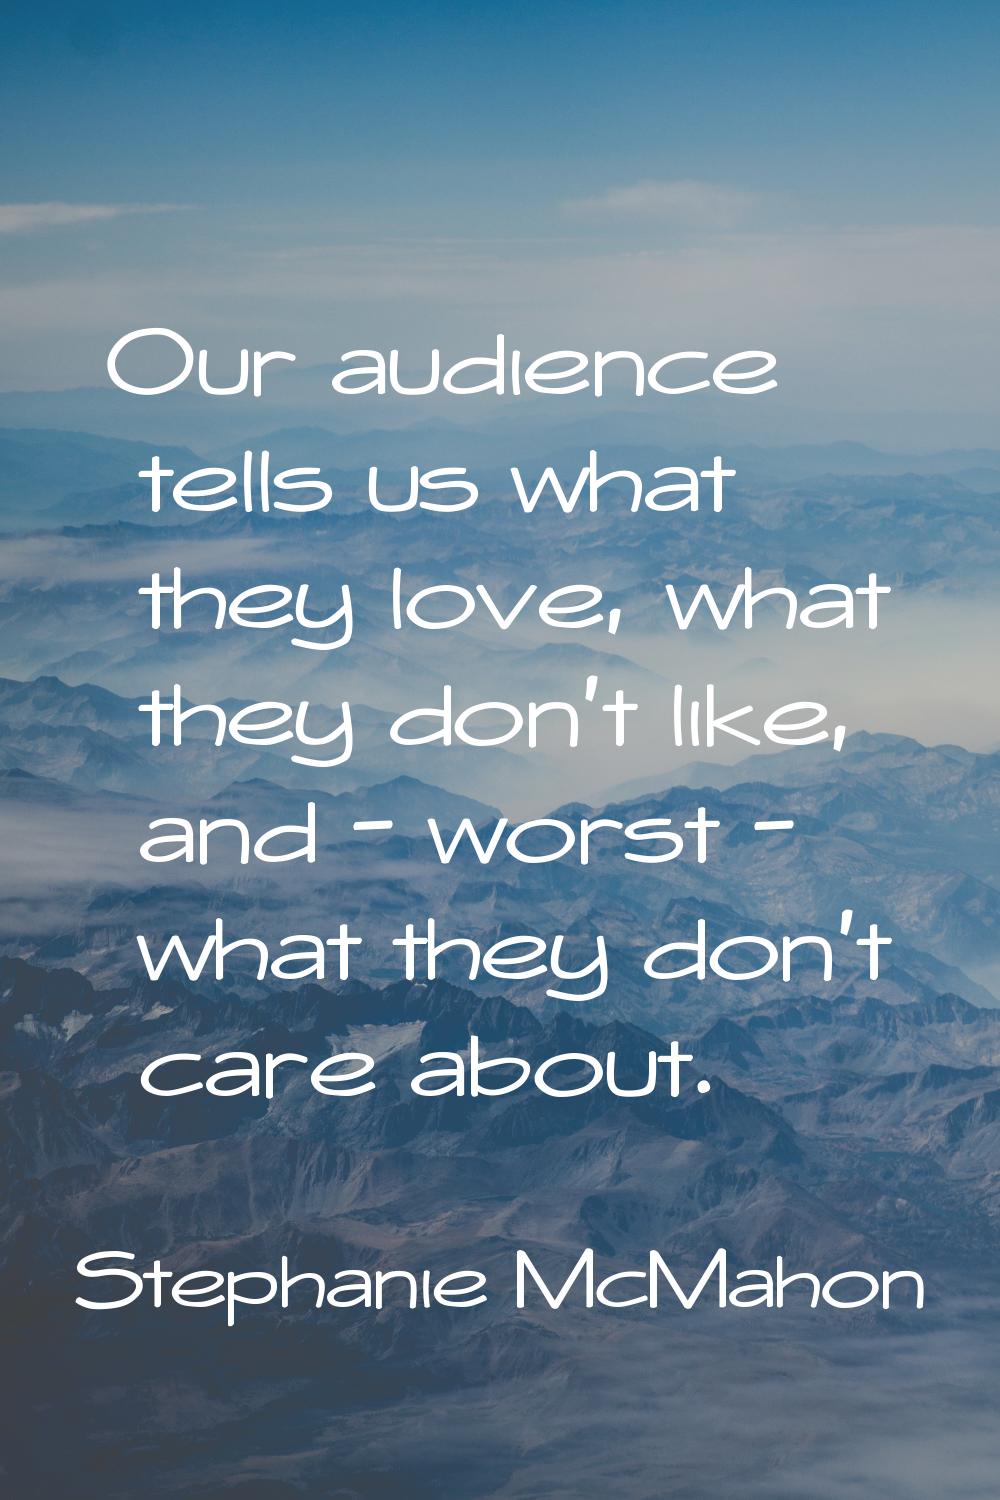 Our audience tells us what they love, what they don't like, and - worst - what they don't care abou